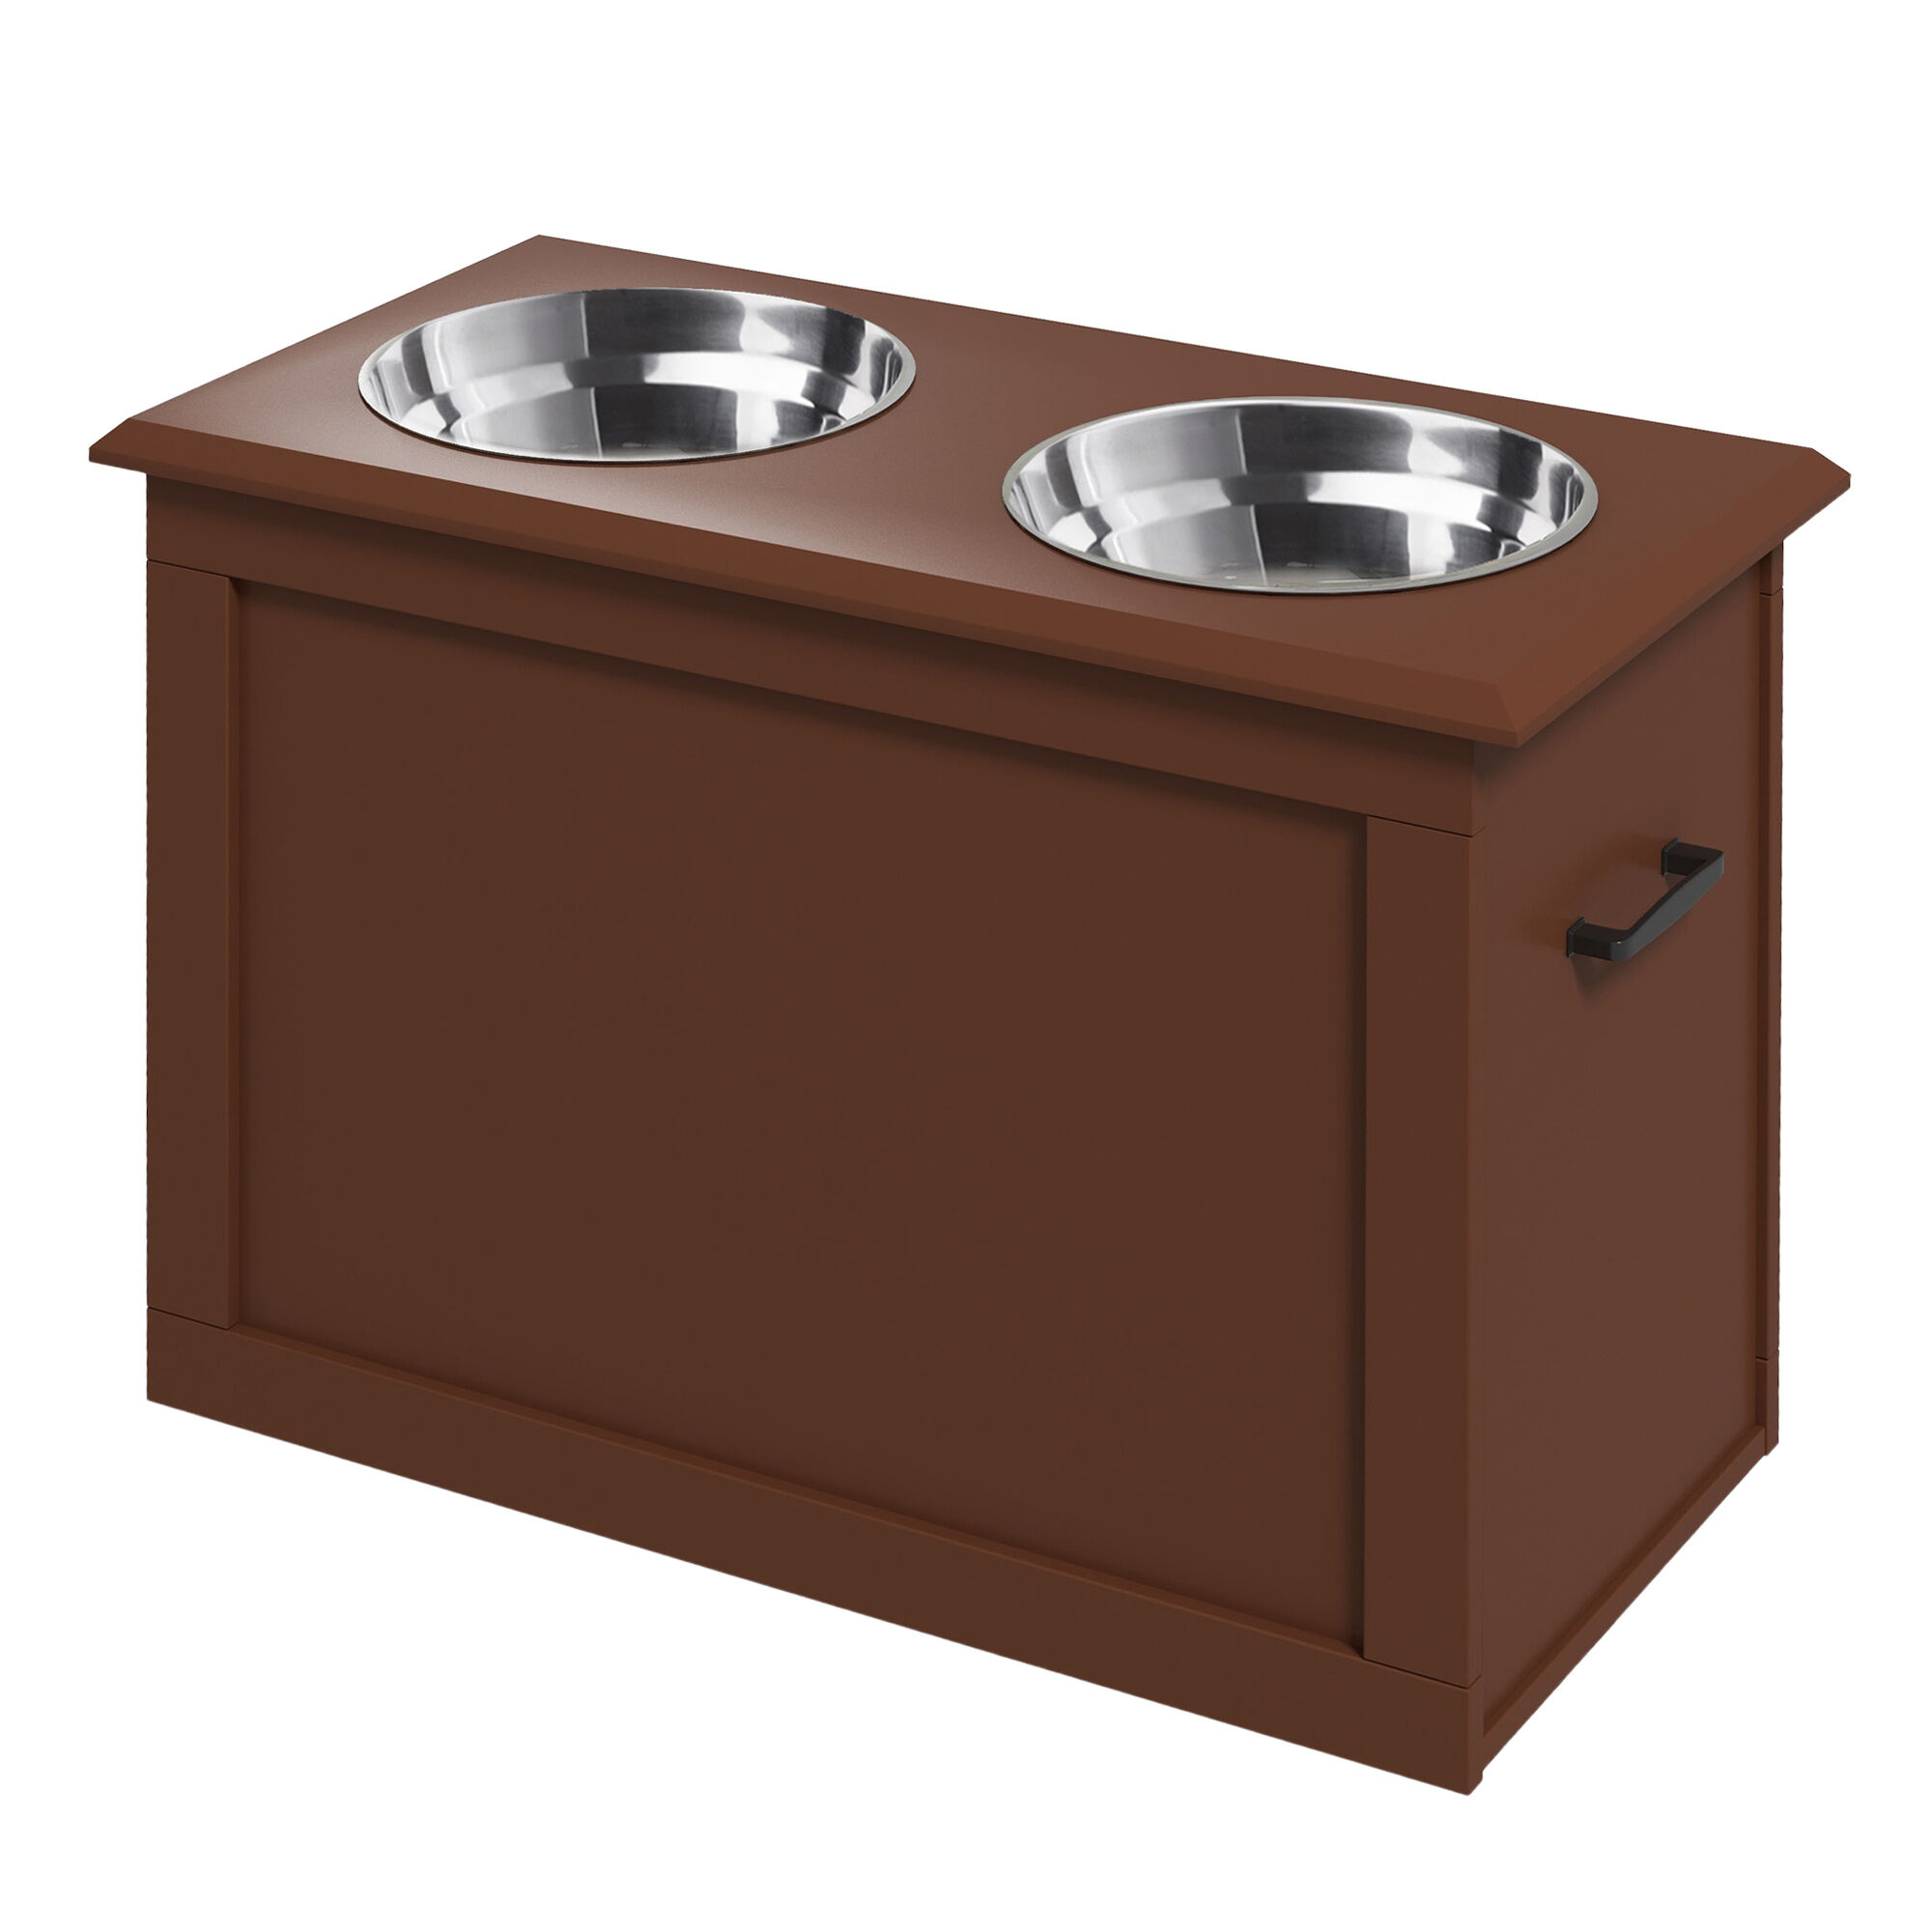 PawHut Elevated Dog Feeder with Storage 2 Stainless Steel Bowls for Large Pets Brown   Aosom.com